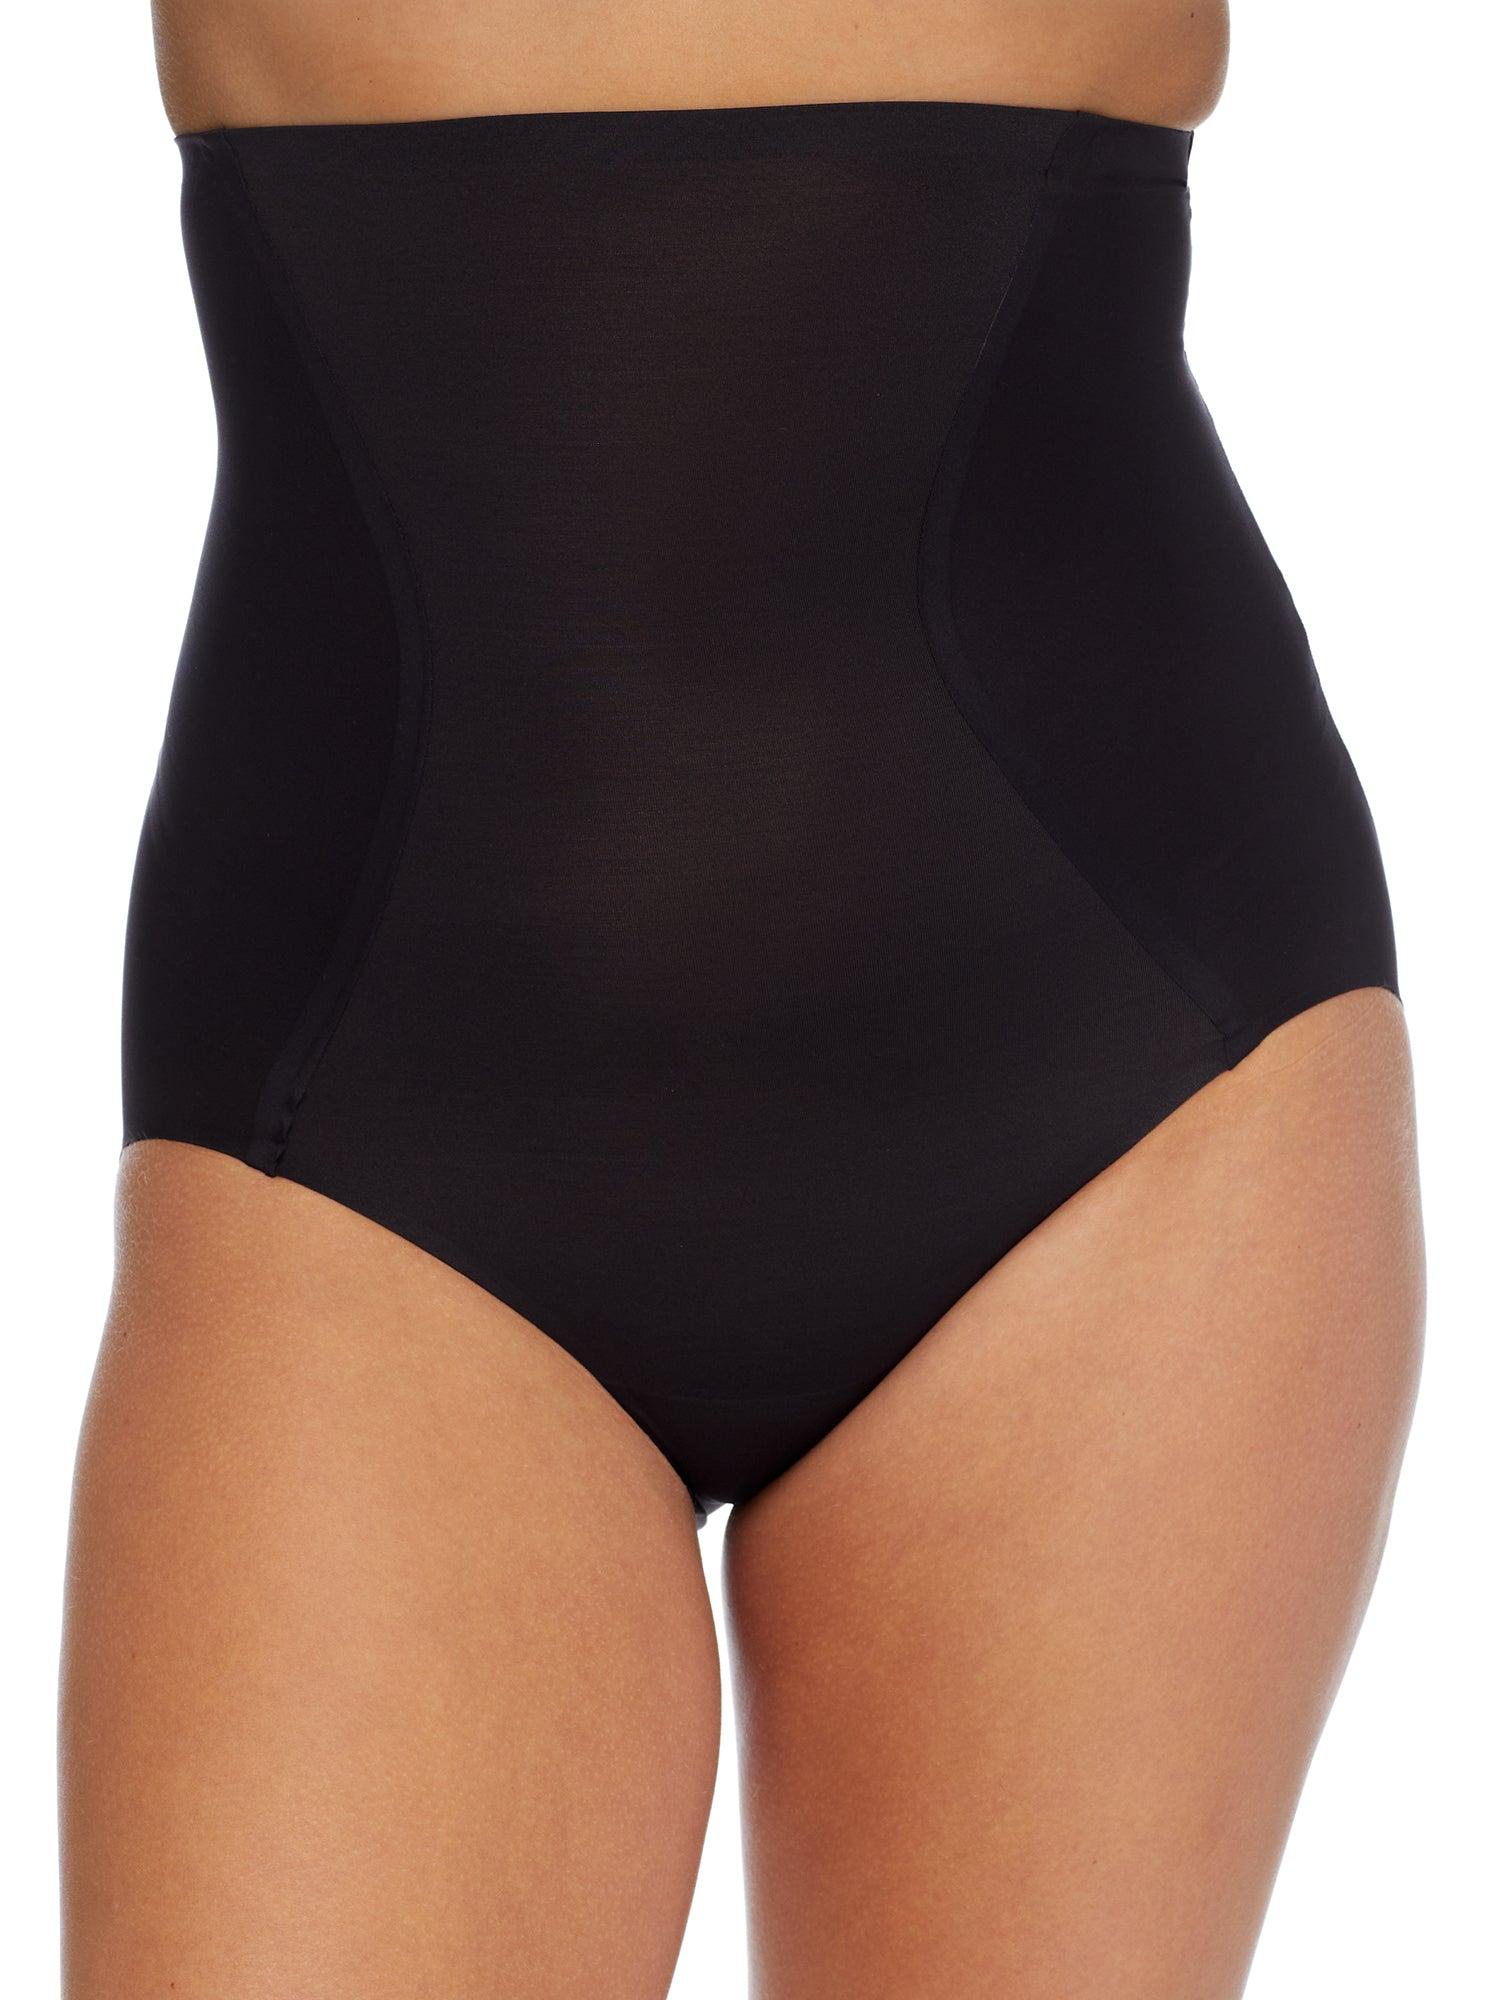 Bali Easylite Firm Control High-waist Shaping Brief in Black